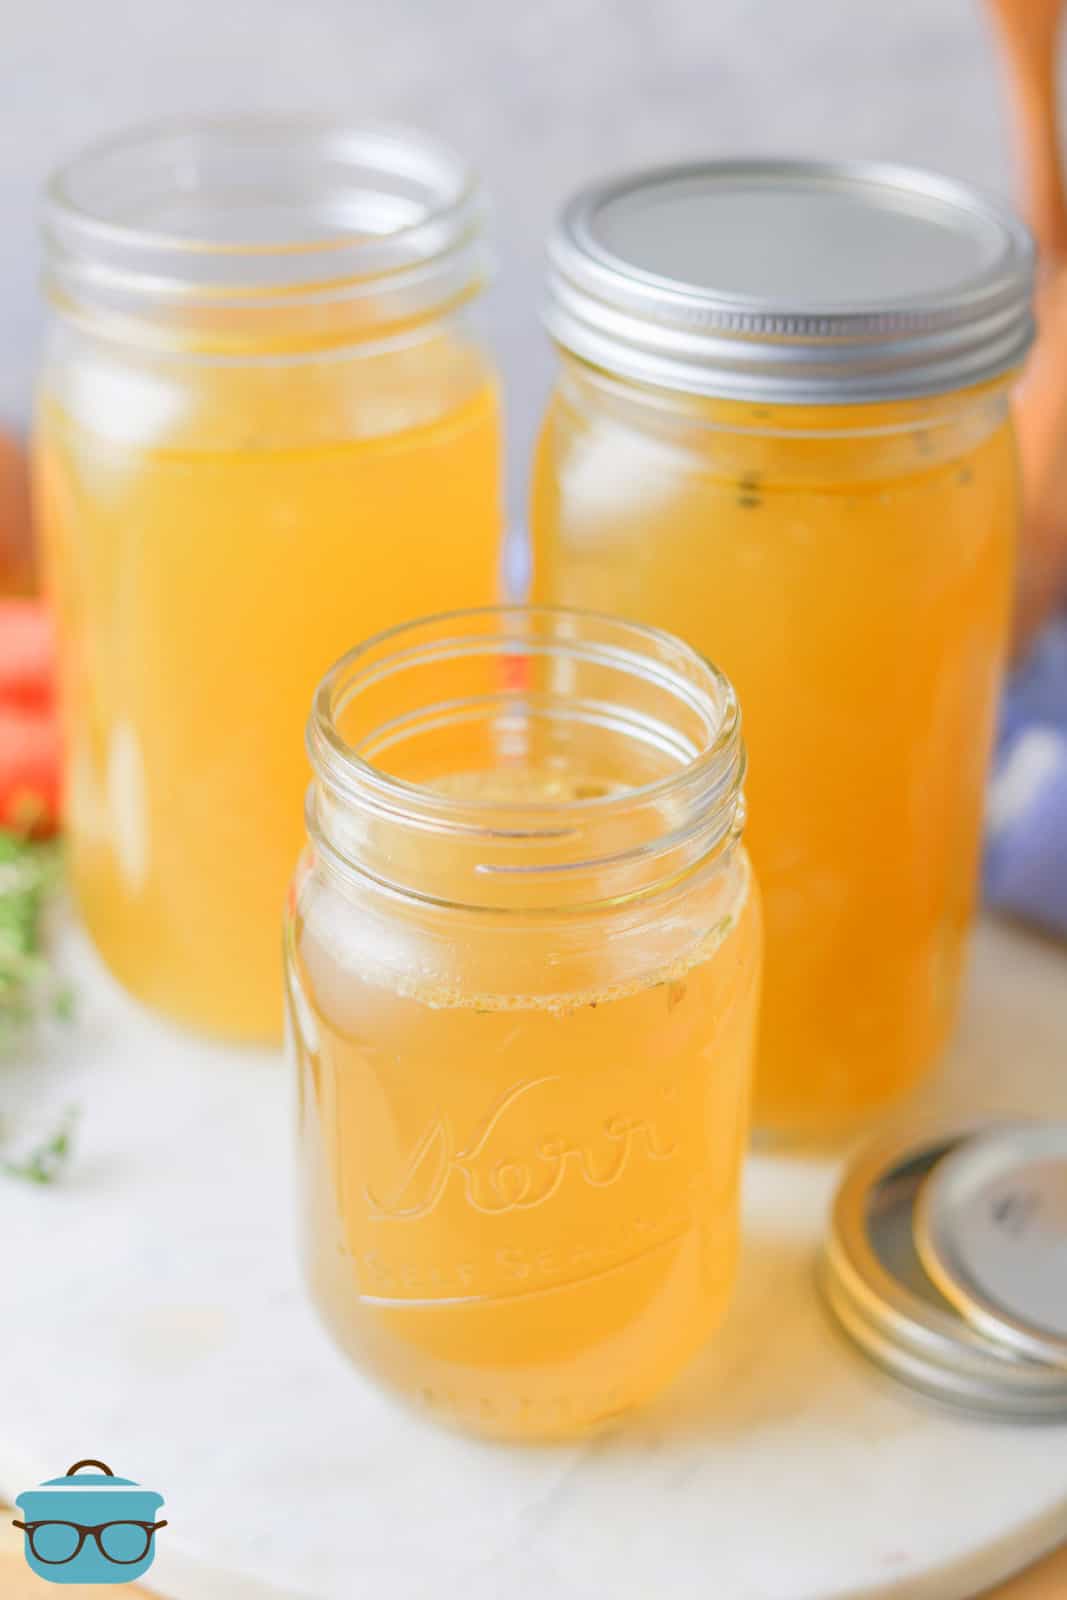 Homemade Chicken Broth in mason jars 2 with lids off.